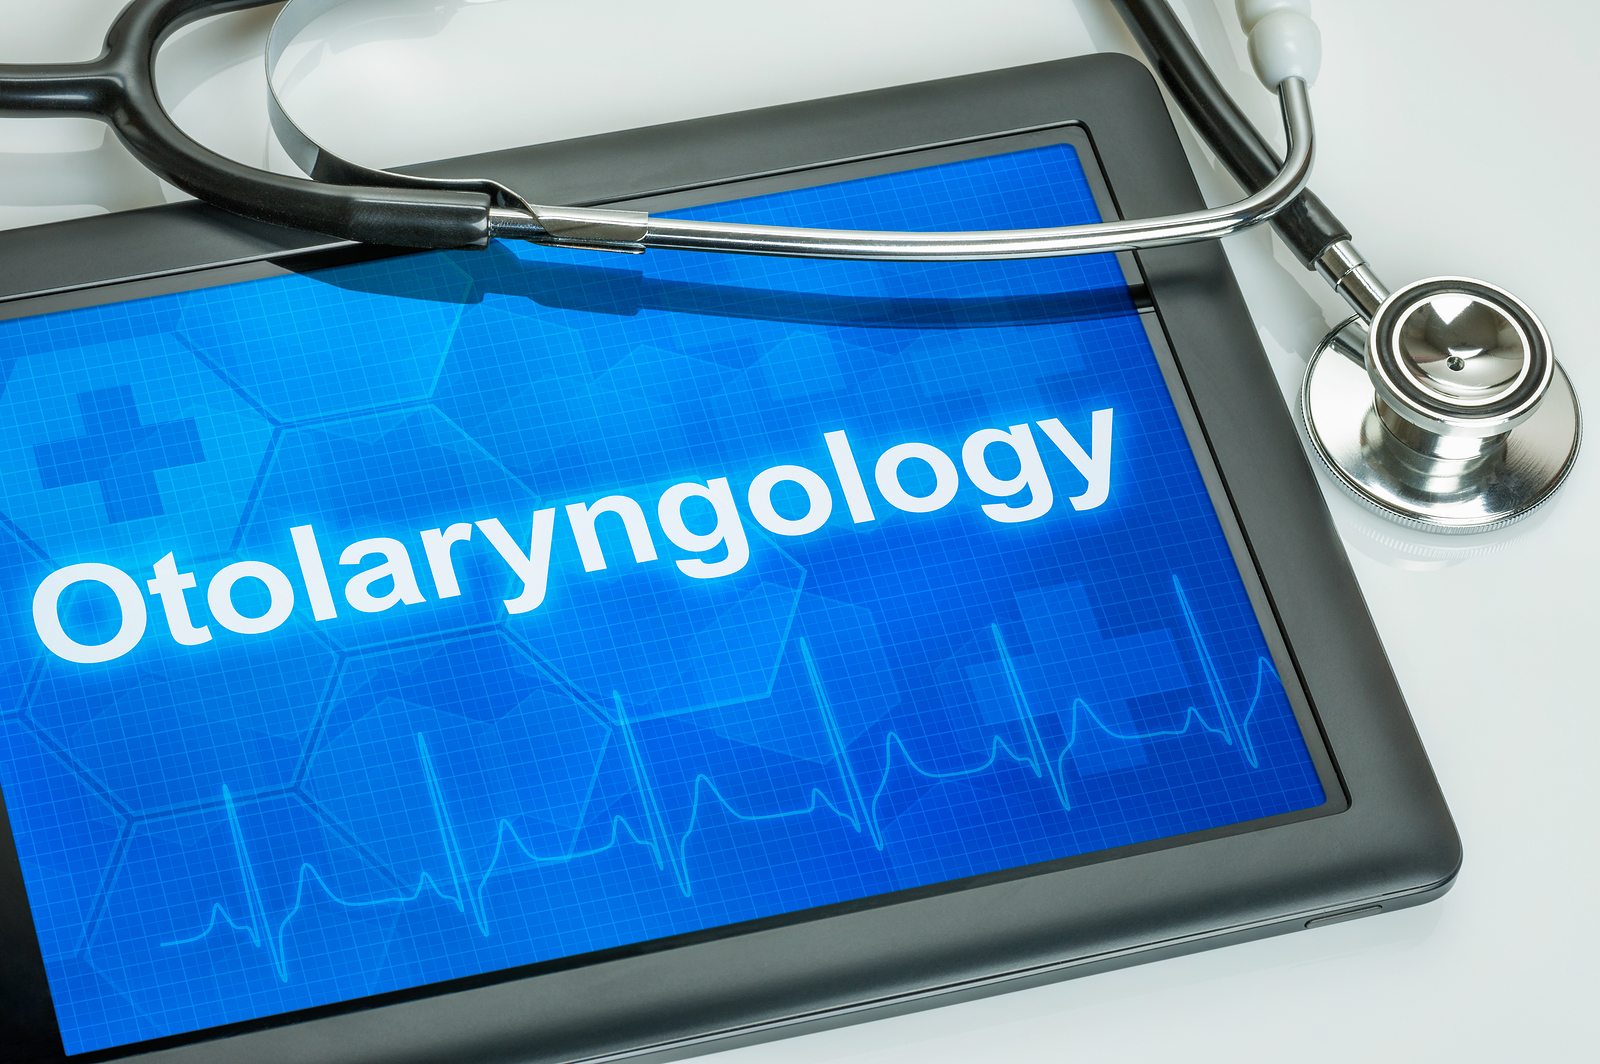 Tablet with the medical specialty Otolaryngology on the display